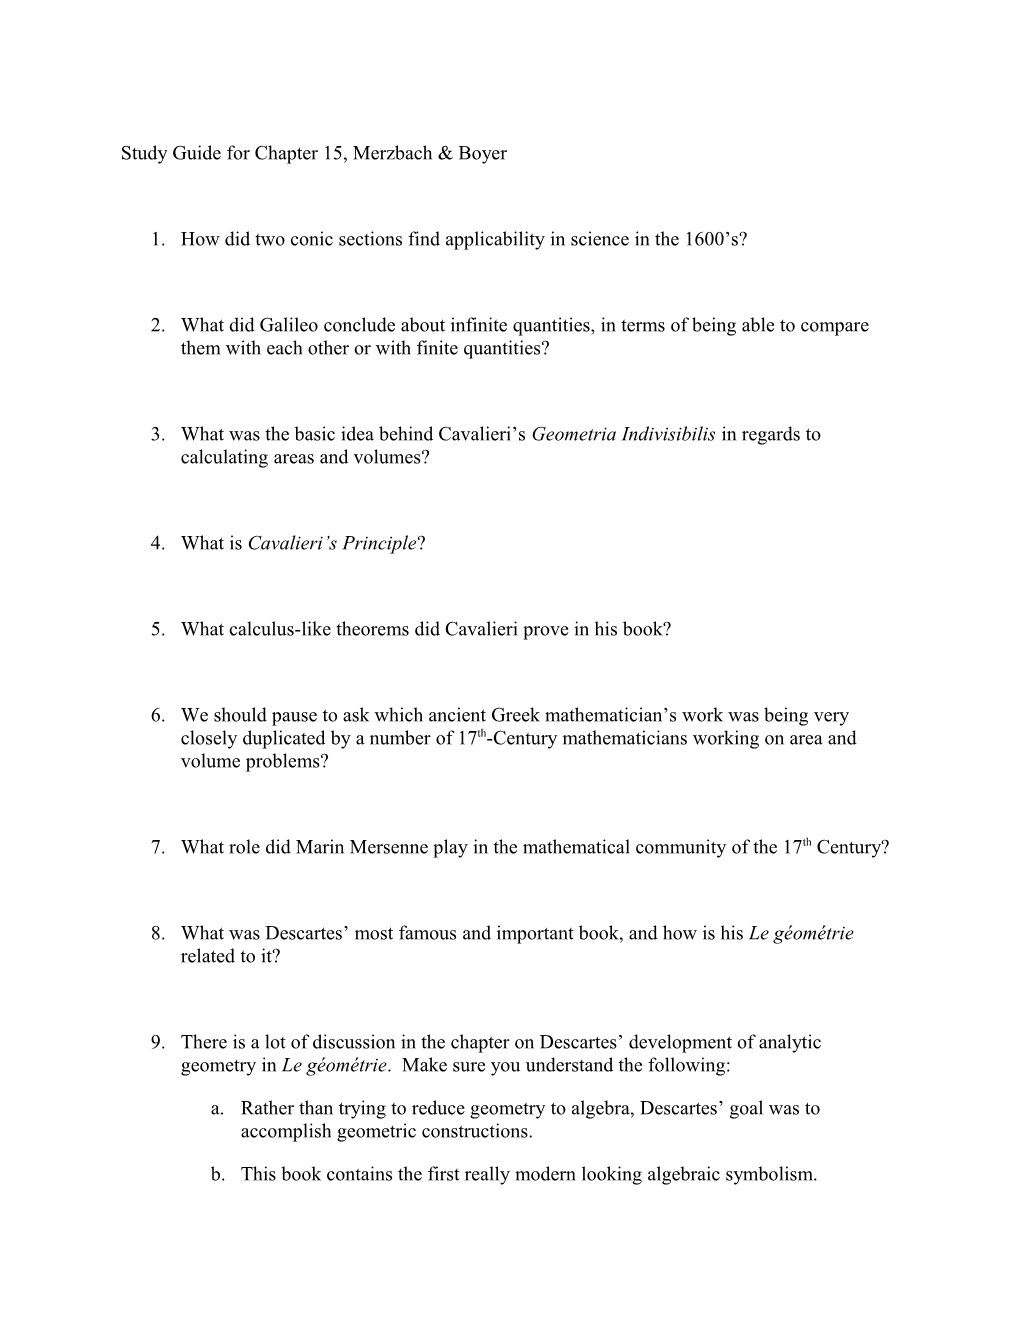 Study Guide for Chapter 15, Merzbach & Boyer